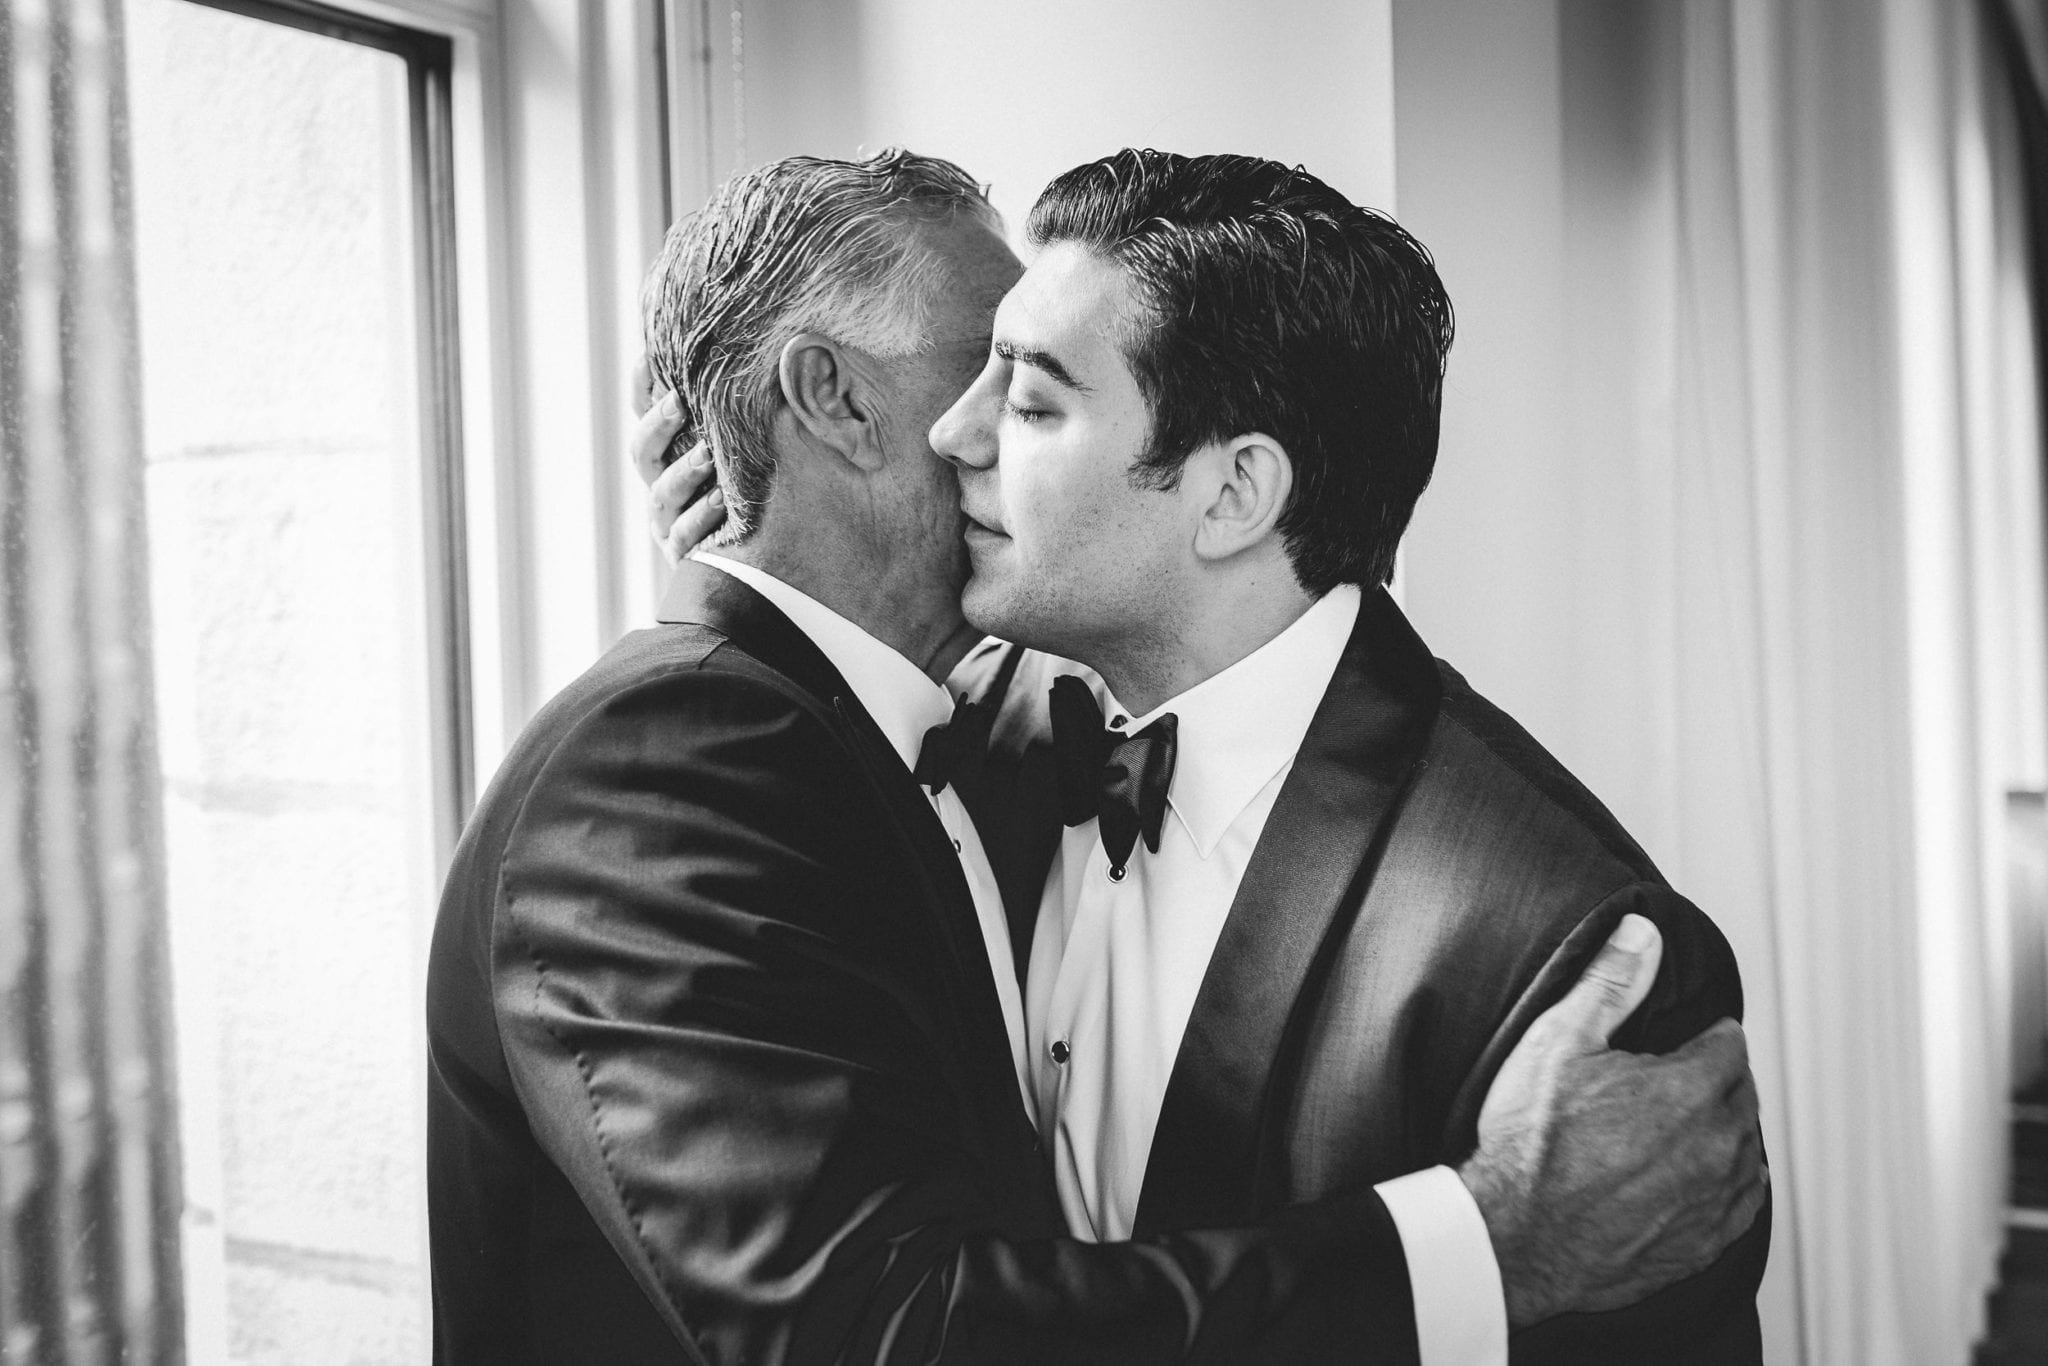 two men in tuxedos and bowties hug tightly in a black and white image